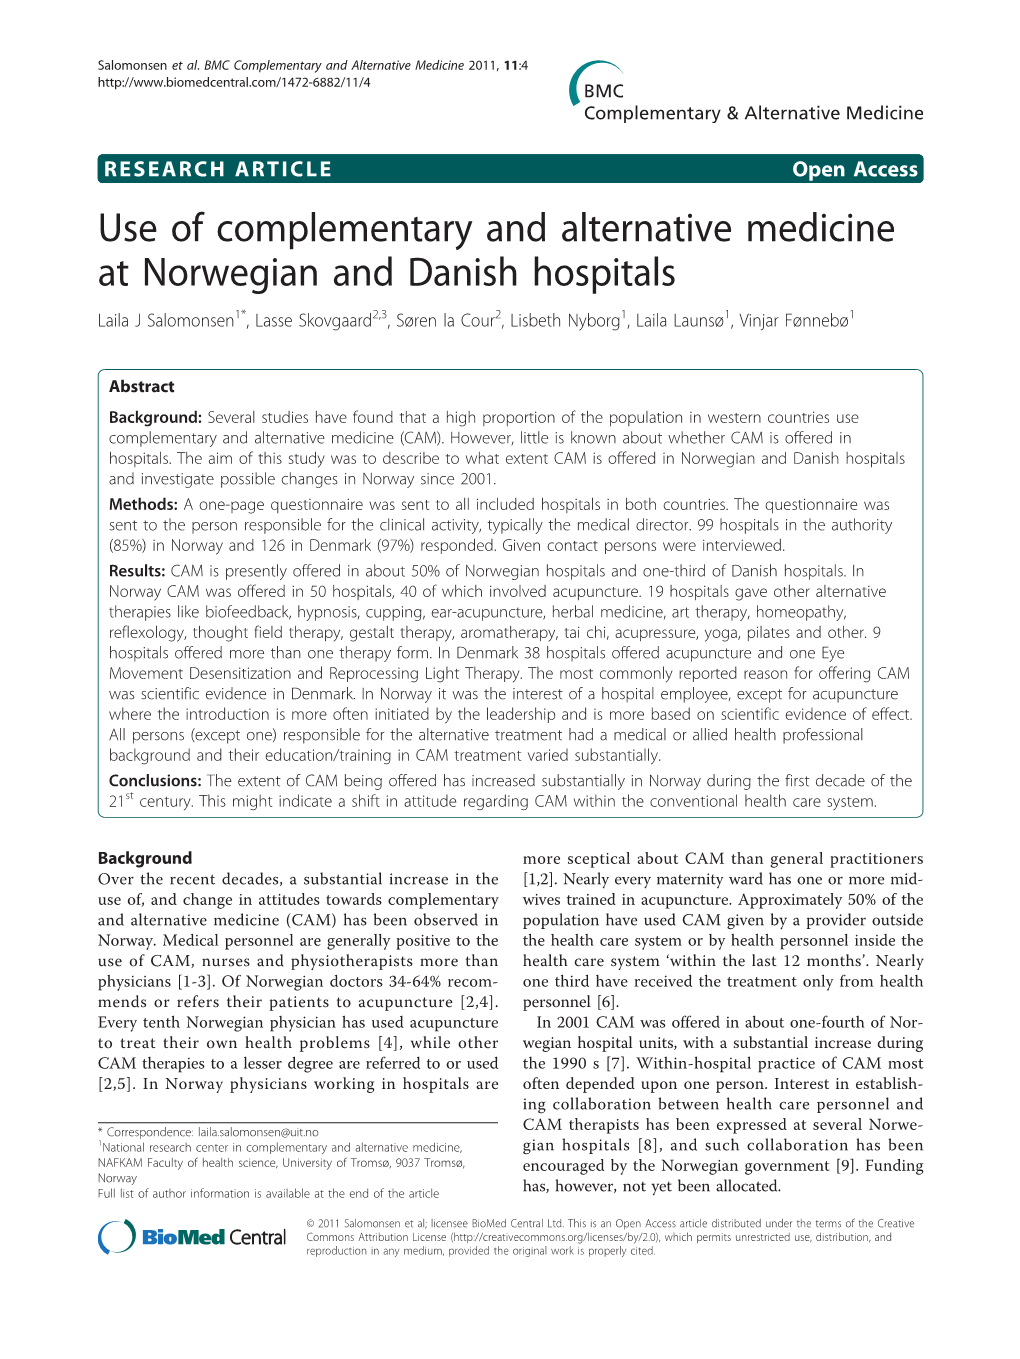 Use of Complementary and Alternative Medicine at Norwegian and Danish